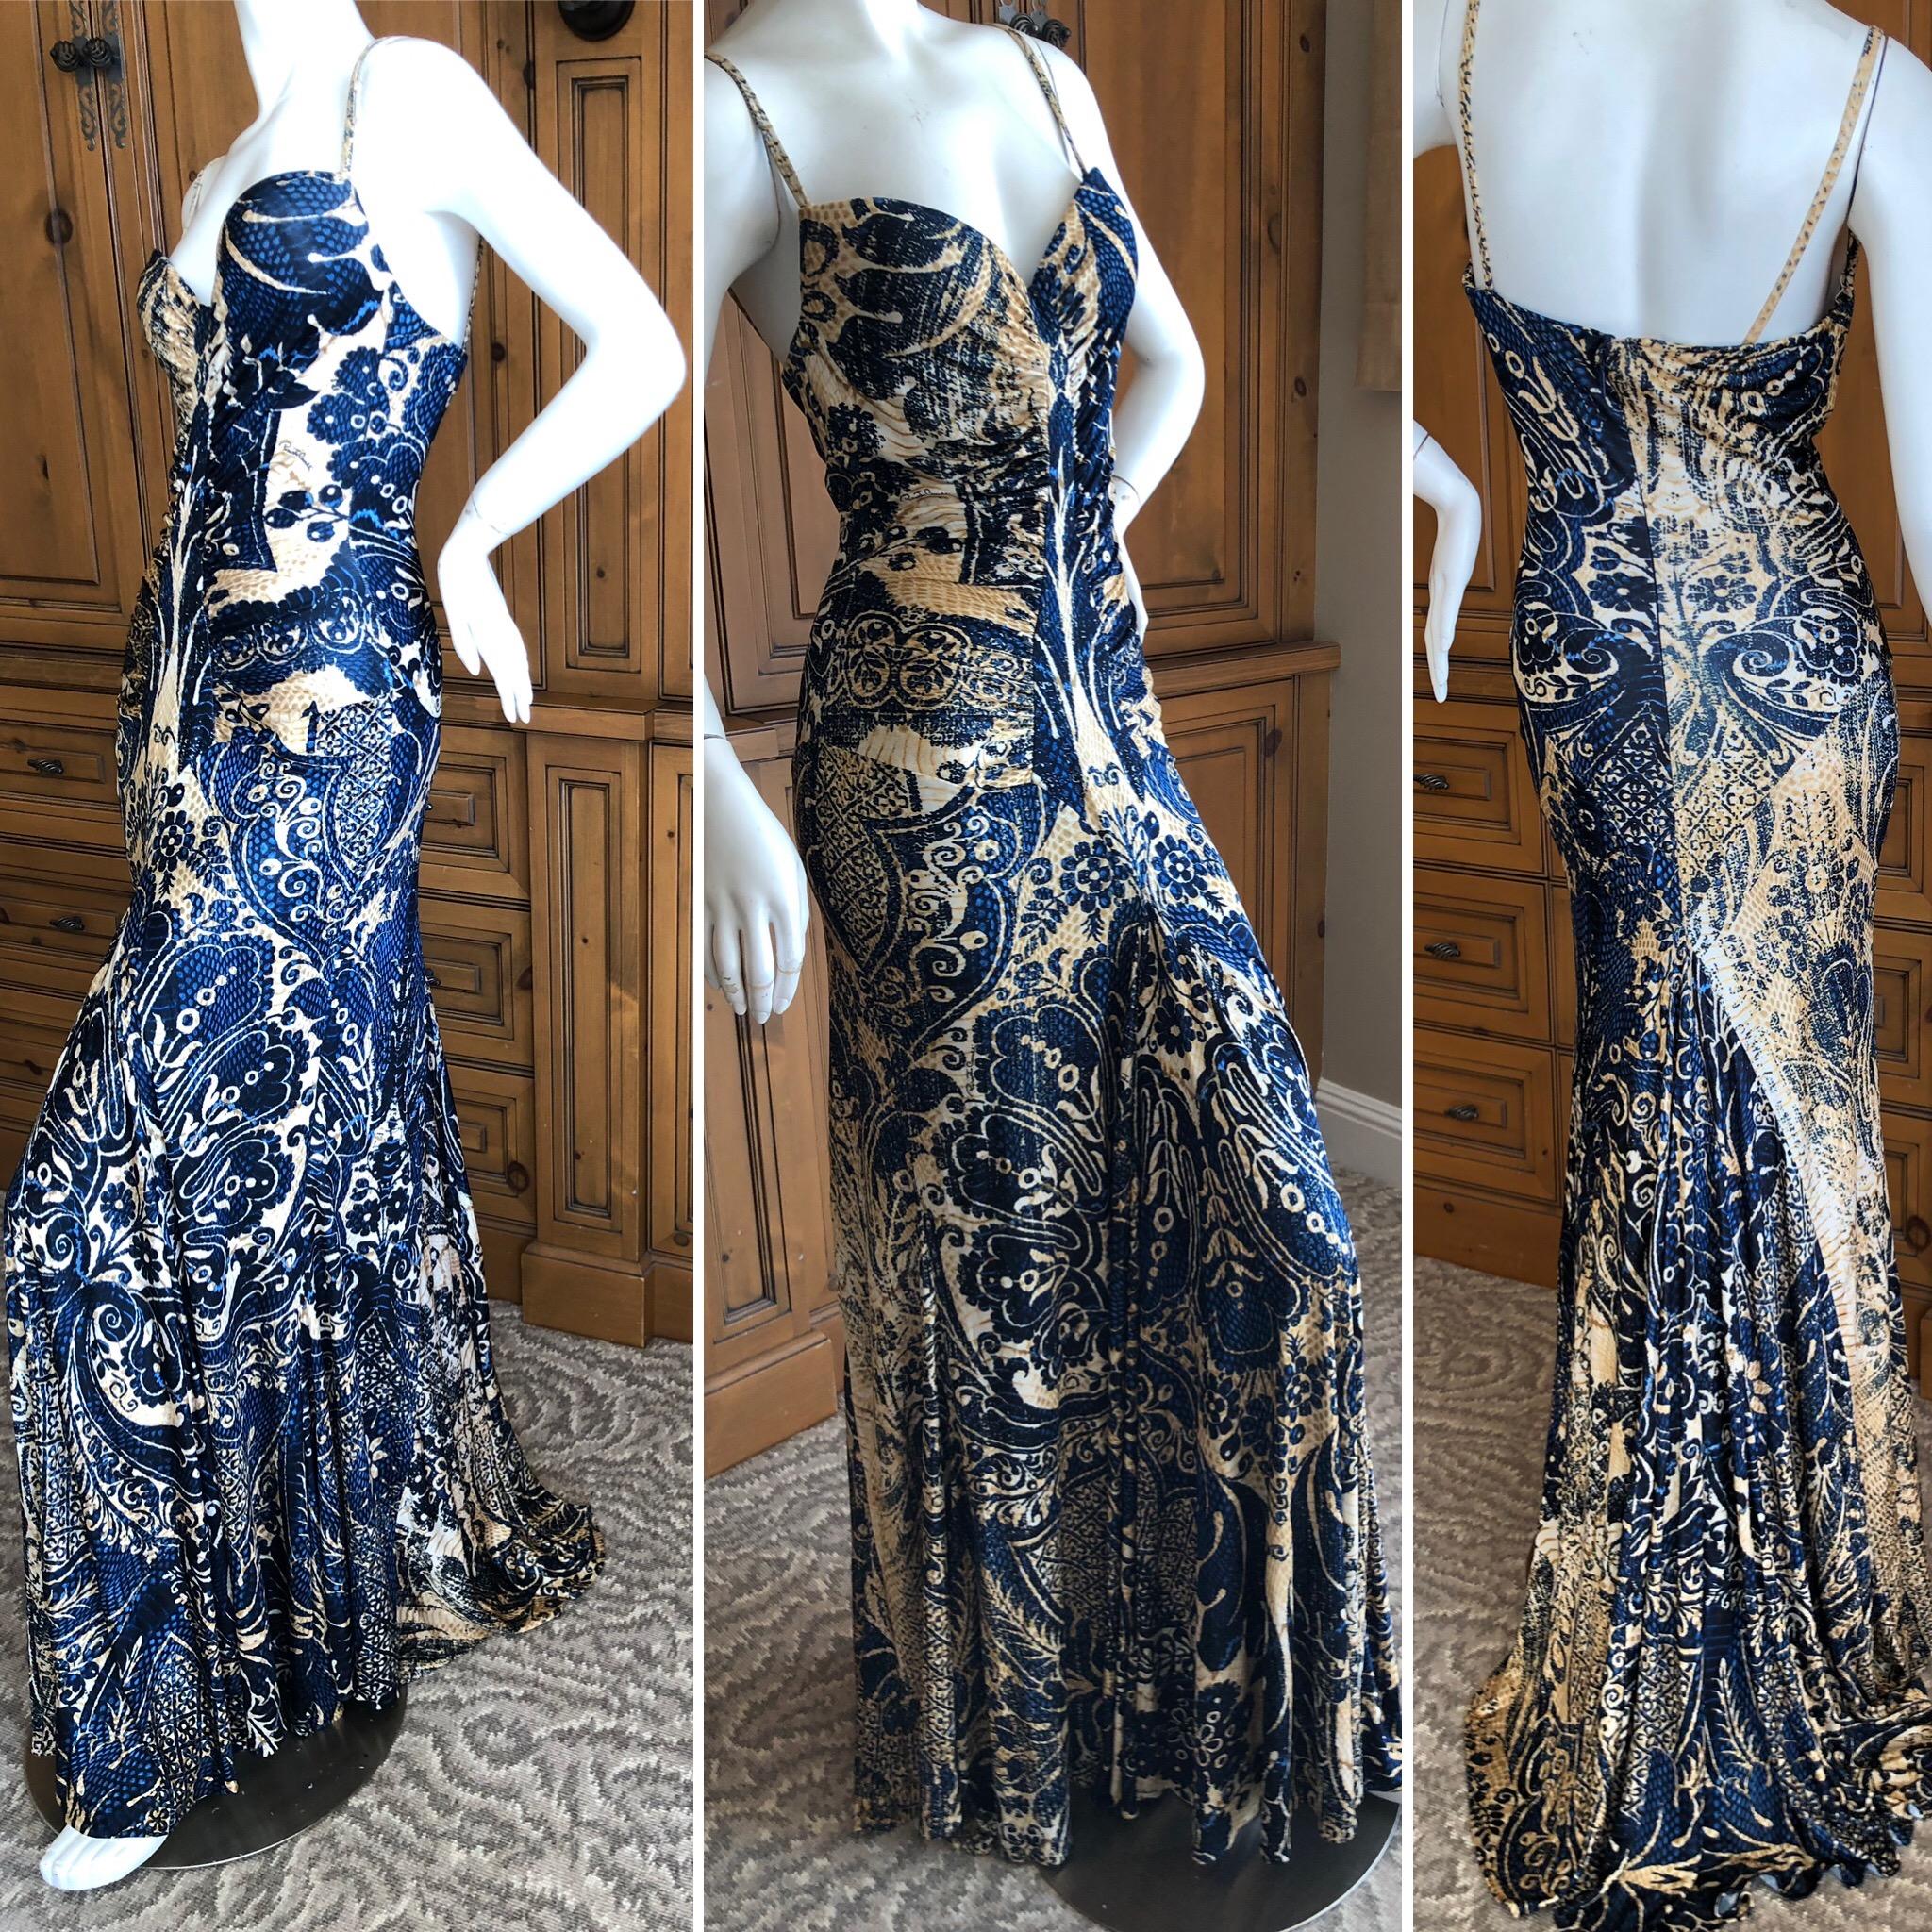 Roberto Cavalli Vintage Low Cut Paisley Print Maxi Dress with Full Skirt.
This is so pretty, there is a full inner bra.
Size 42 , there is a lot of stretch
Bust 34